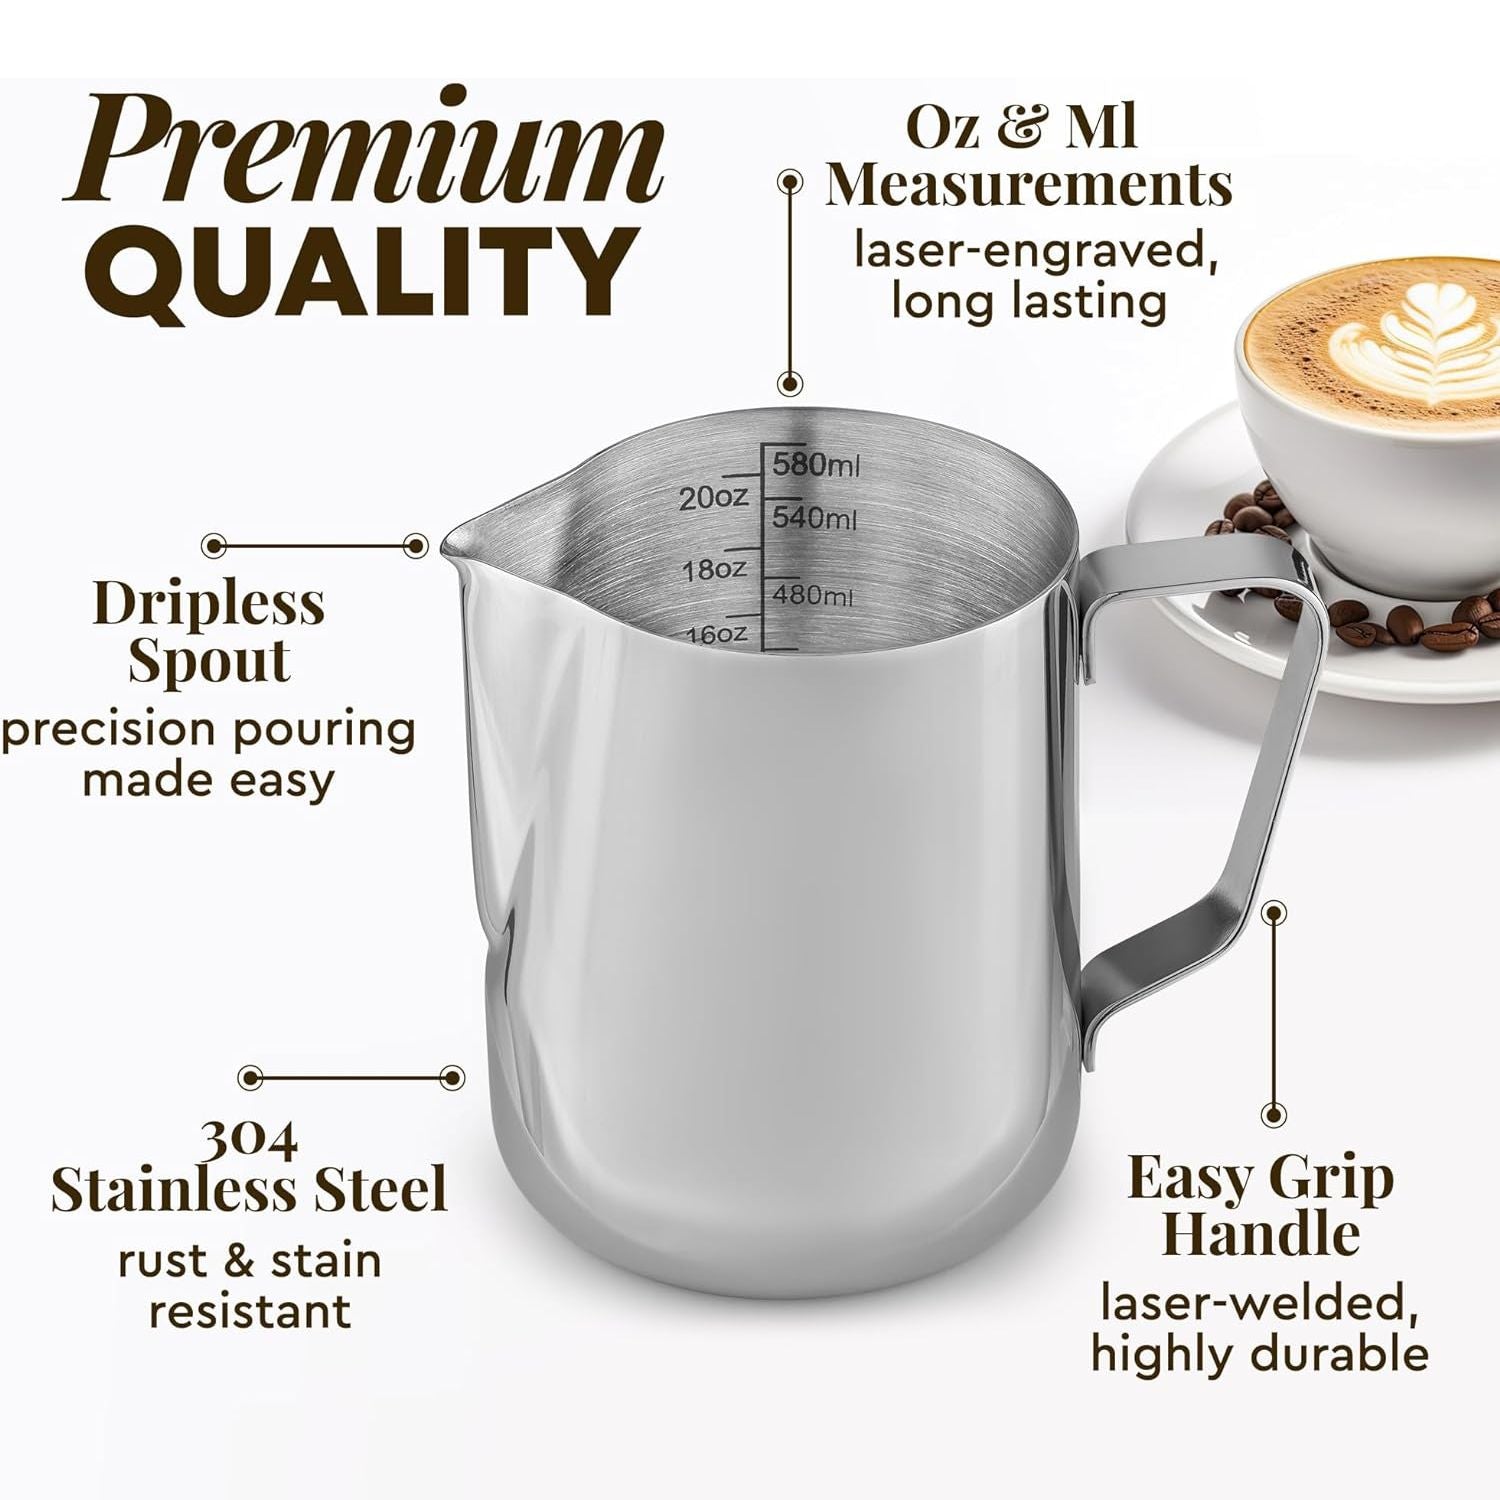 Premium quality Milk frother cup by Zulay Kitchen